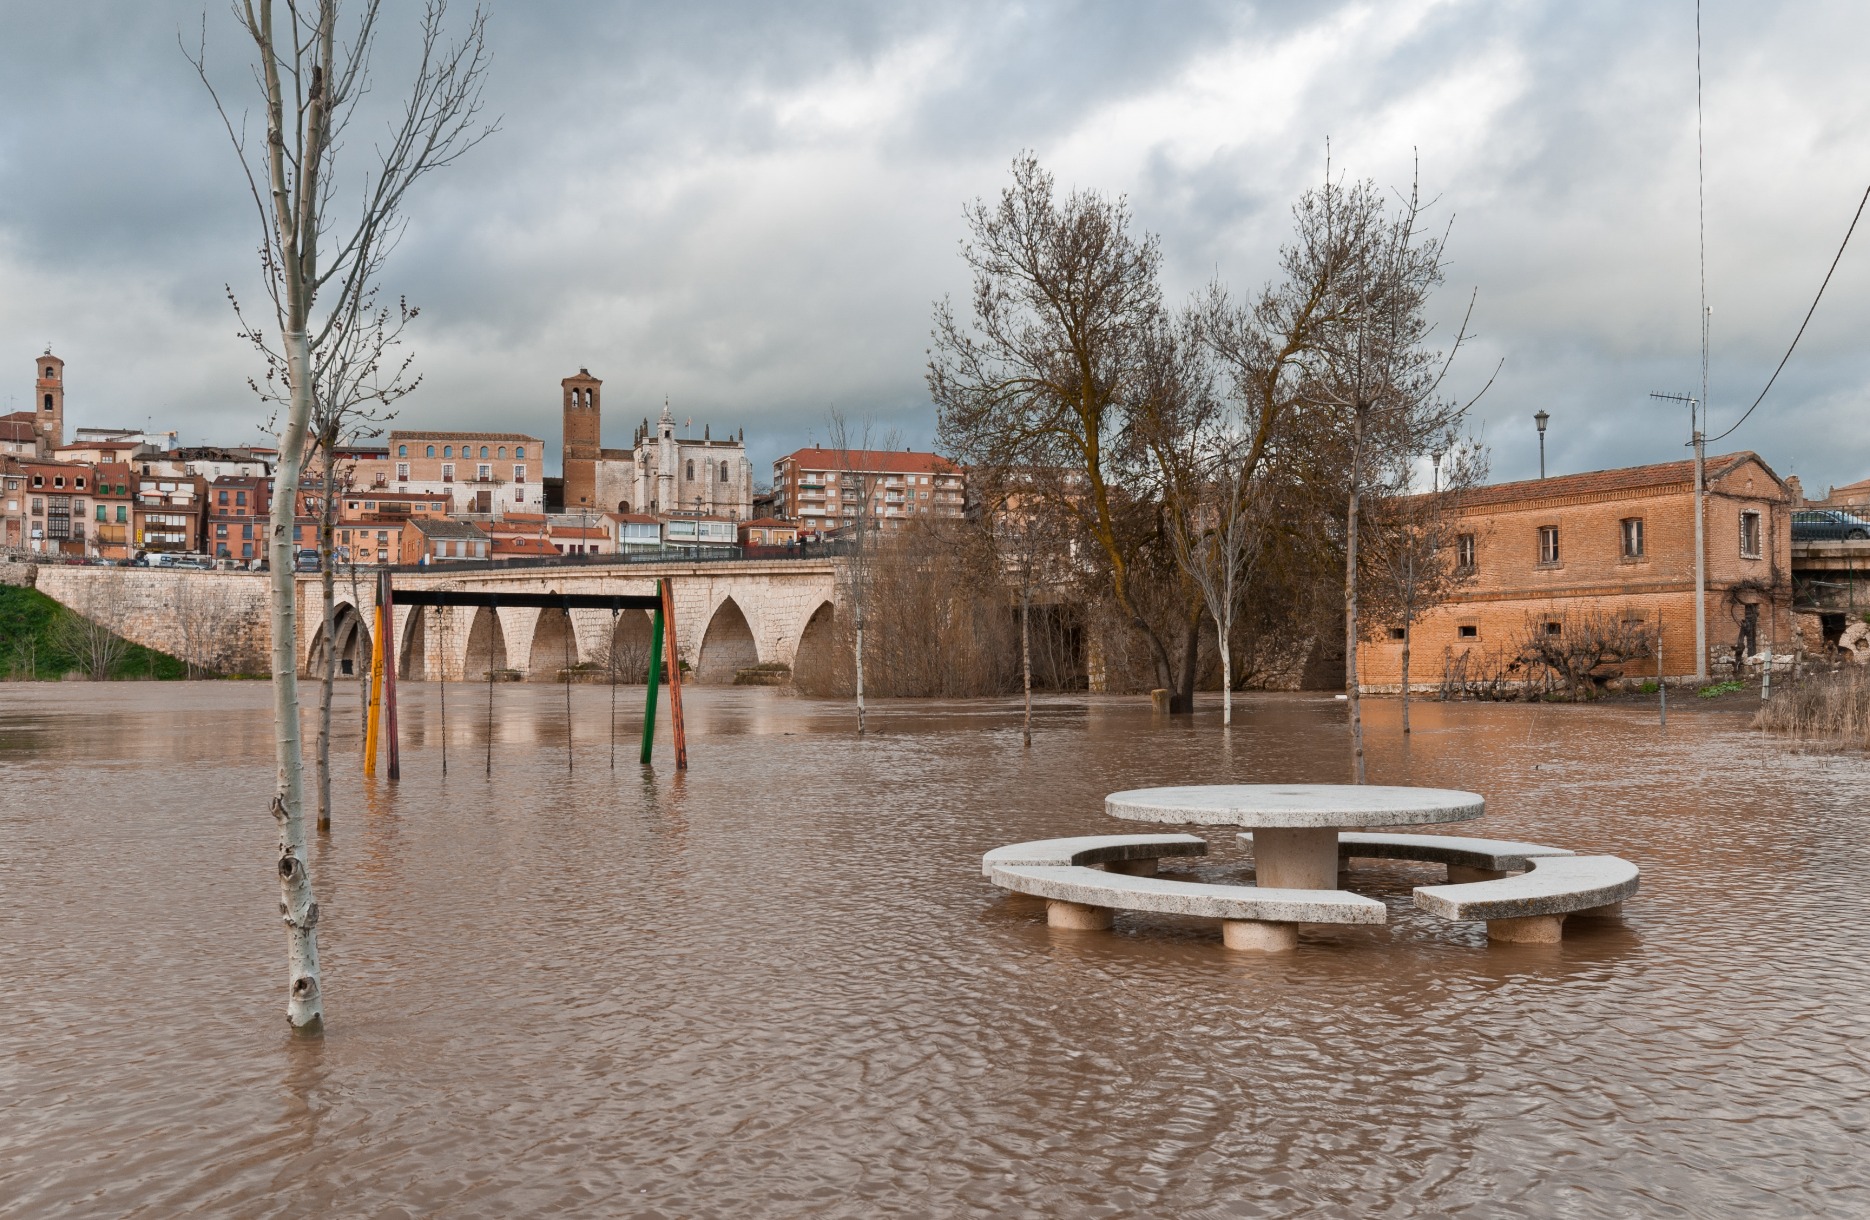 A flooded playground in Spain